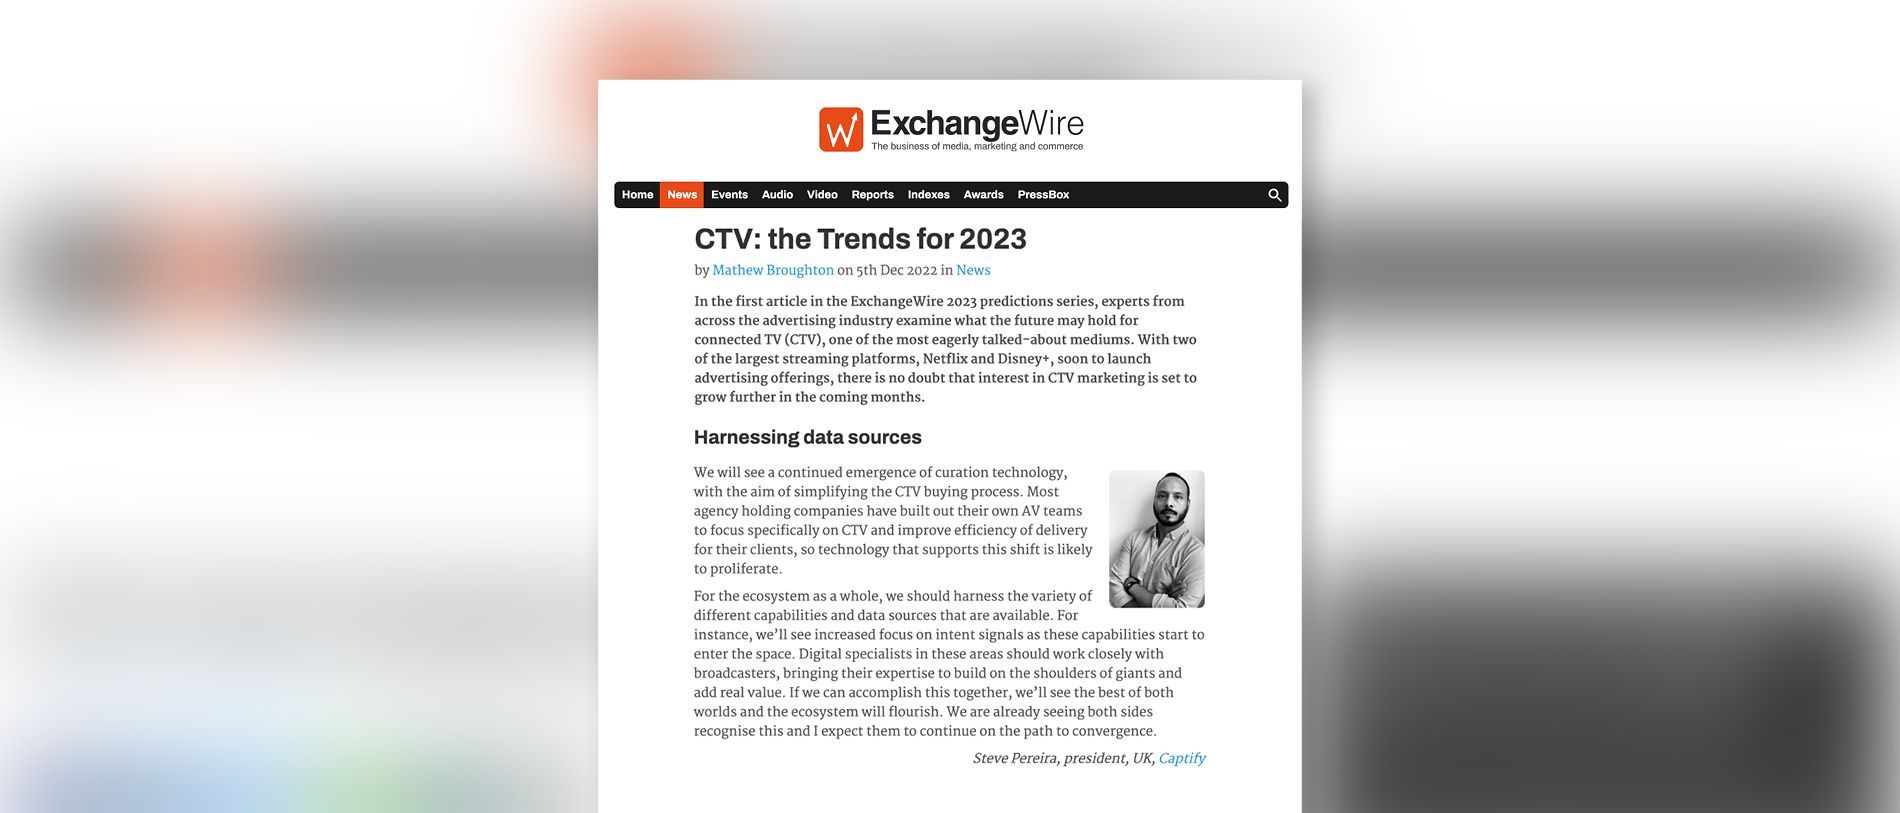 ExchangeWire: CTV— The Trends For 2023